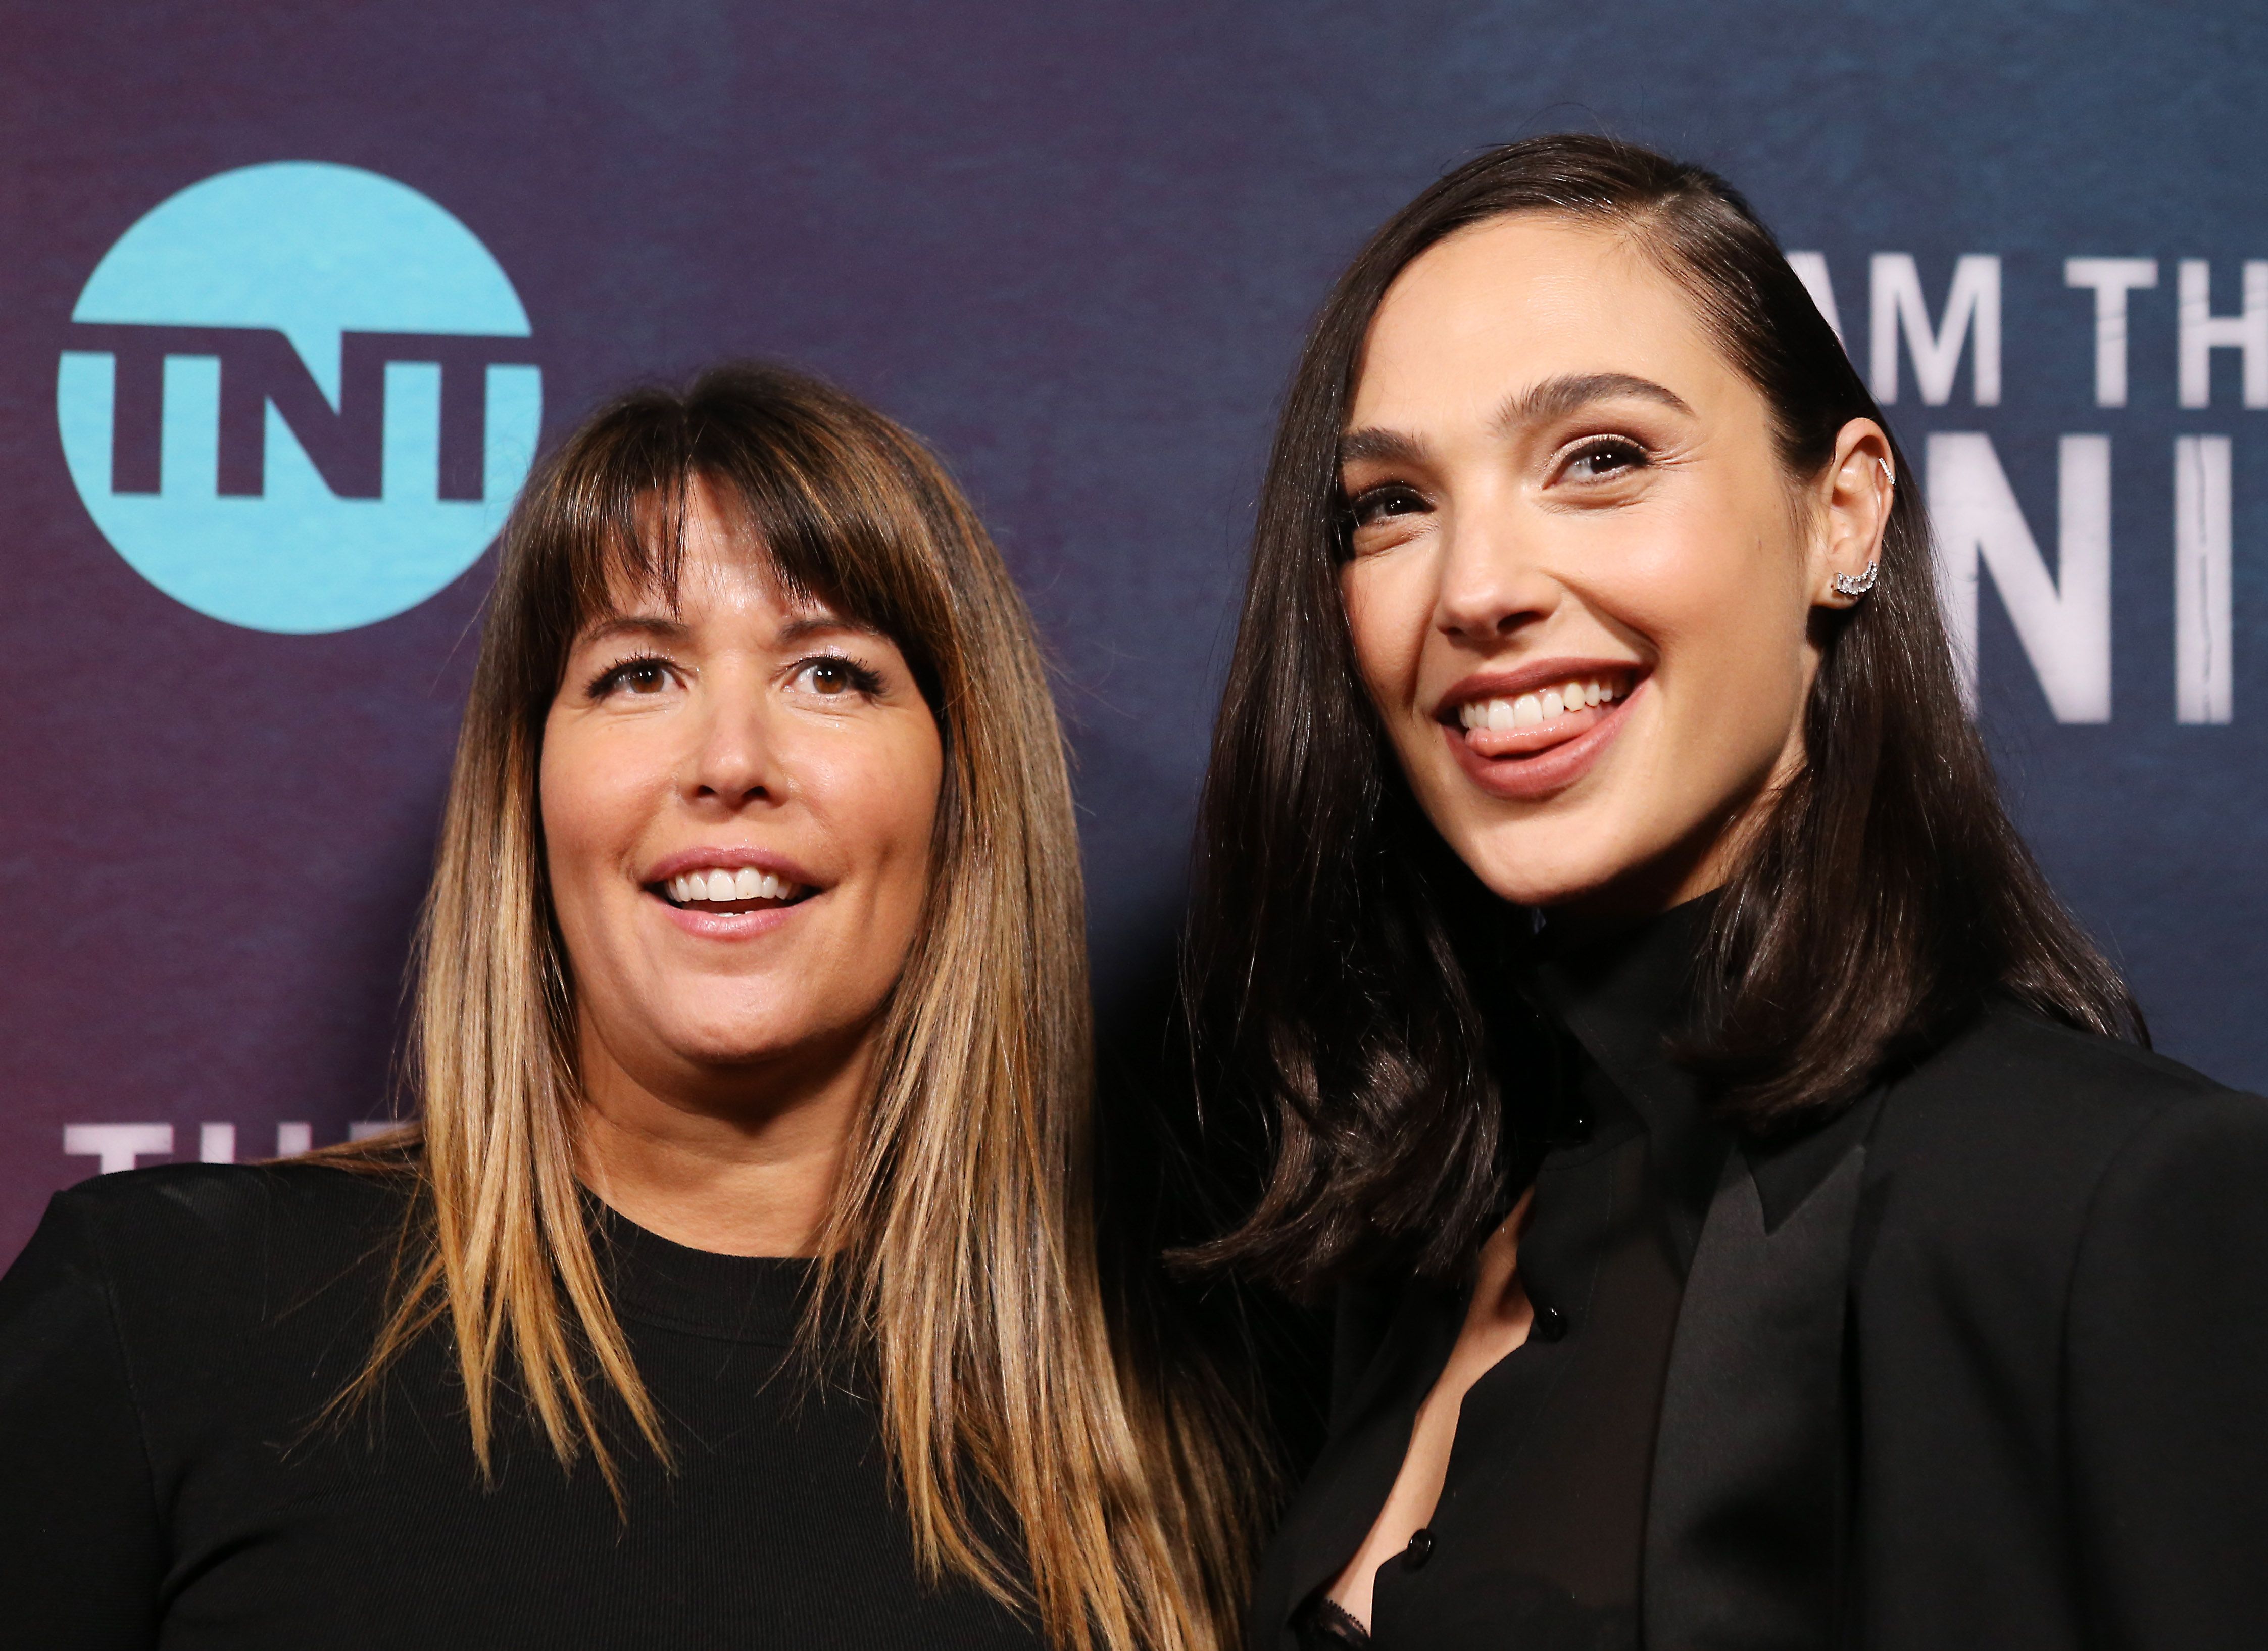 Wonder Woman S Gal Gadot And Patty Jenkins Team Up For Cleopatra